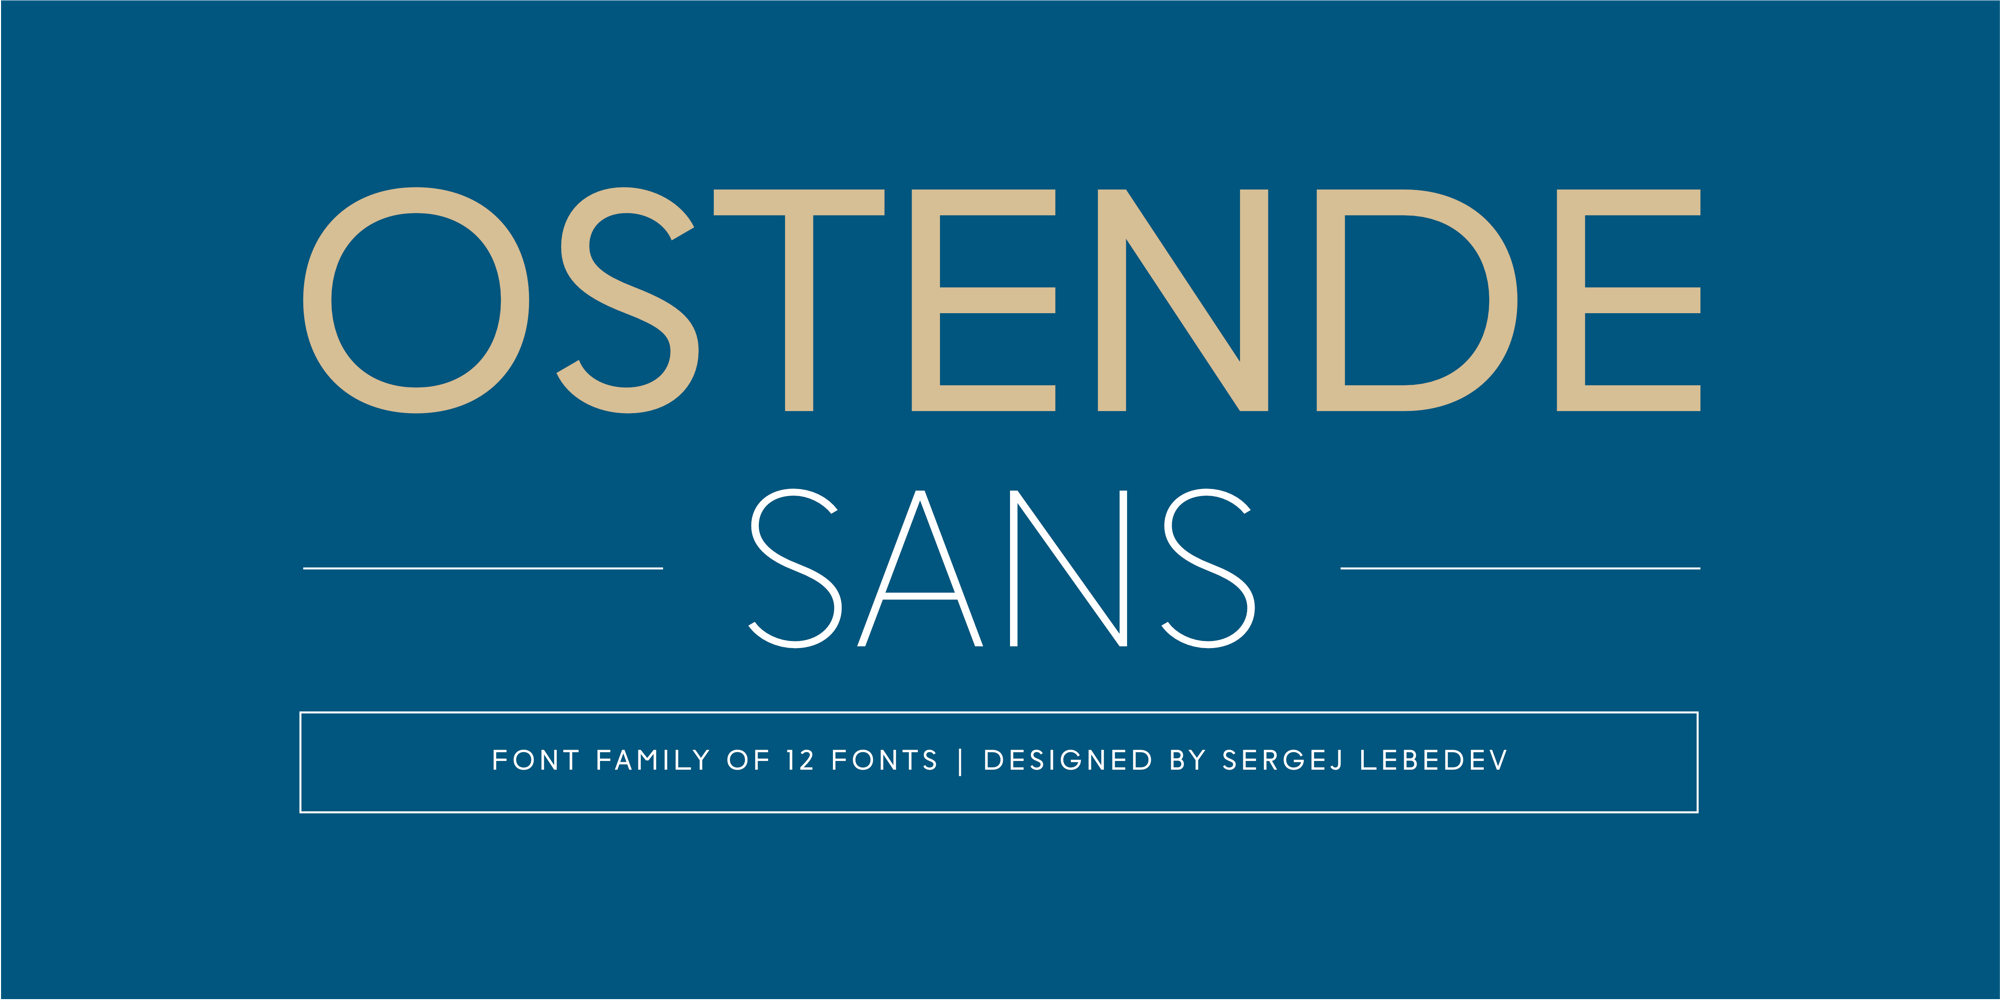 The Ostende Sans font family is a modern typeface with clear and concise letter forms.